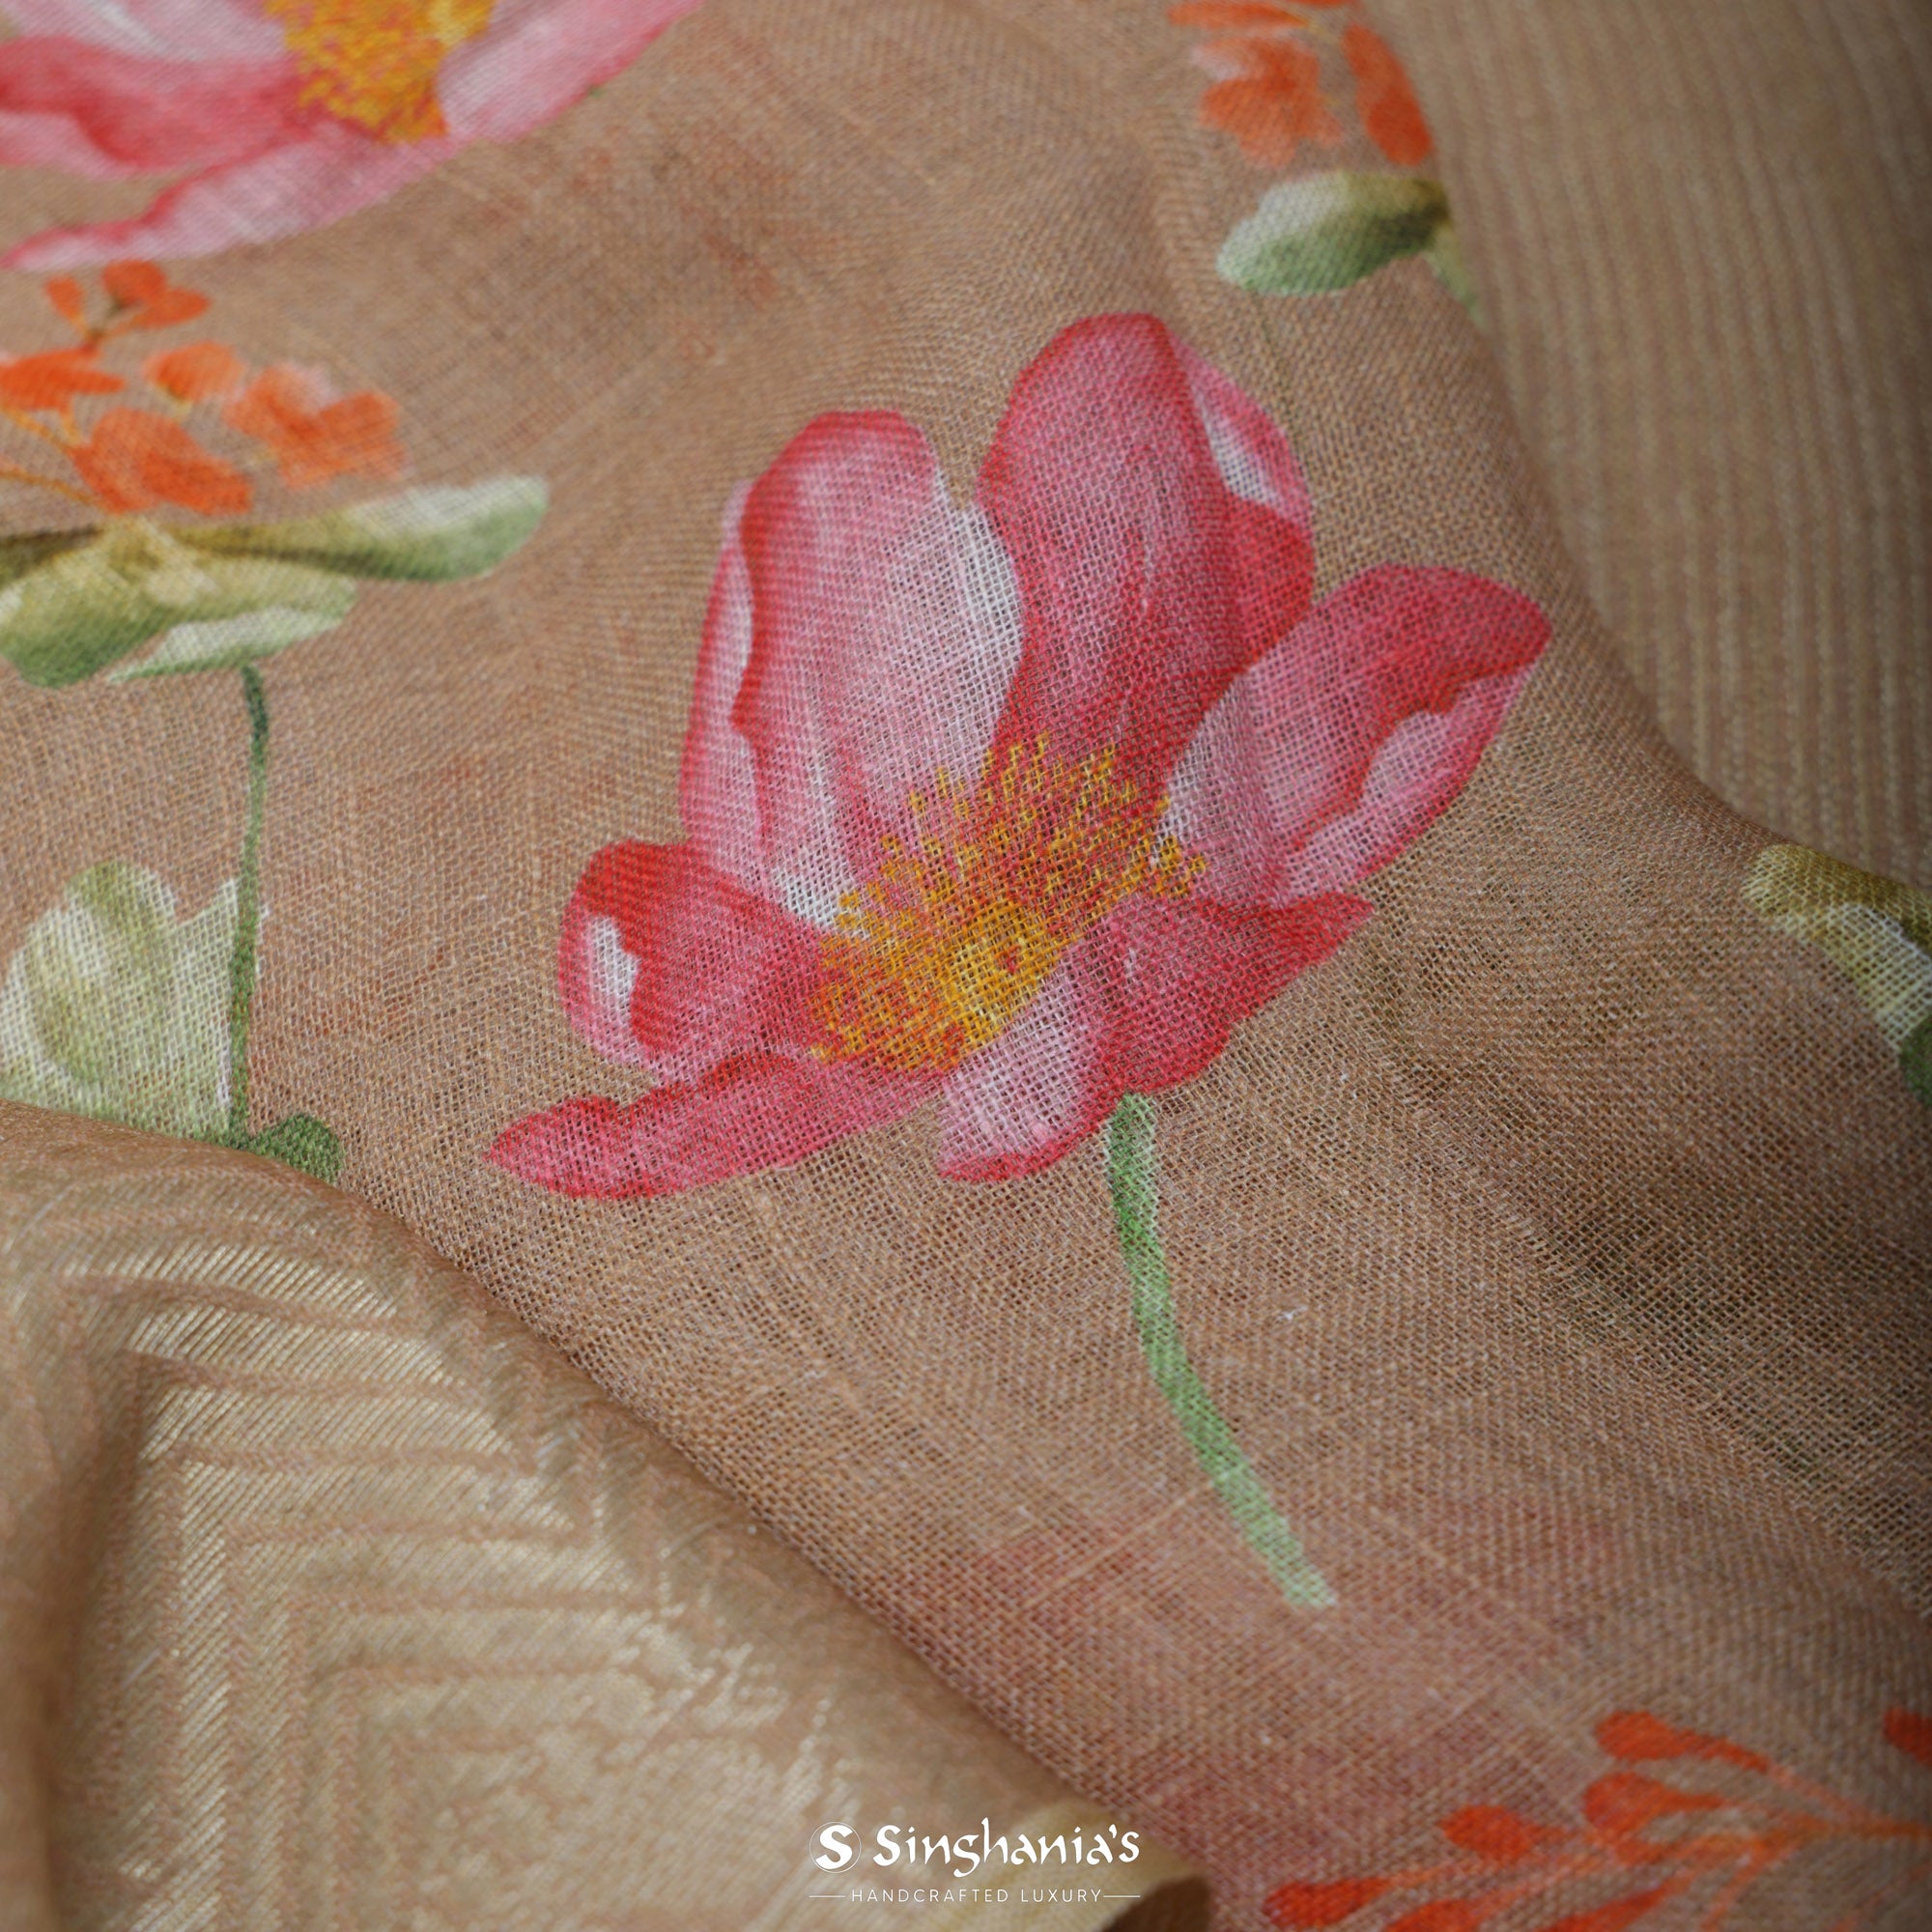 Beaver Brown Printed Linen Saree With Floral Jaal Pattern